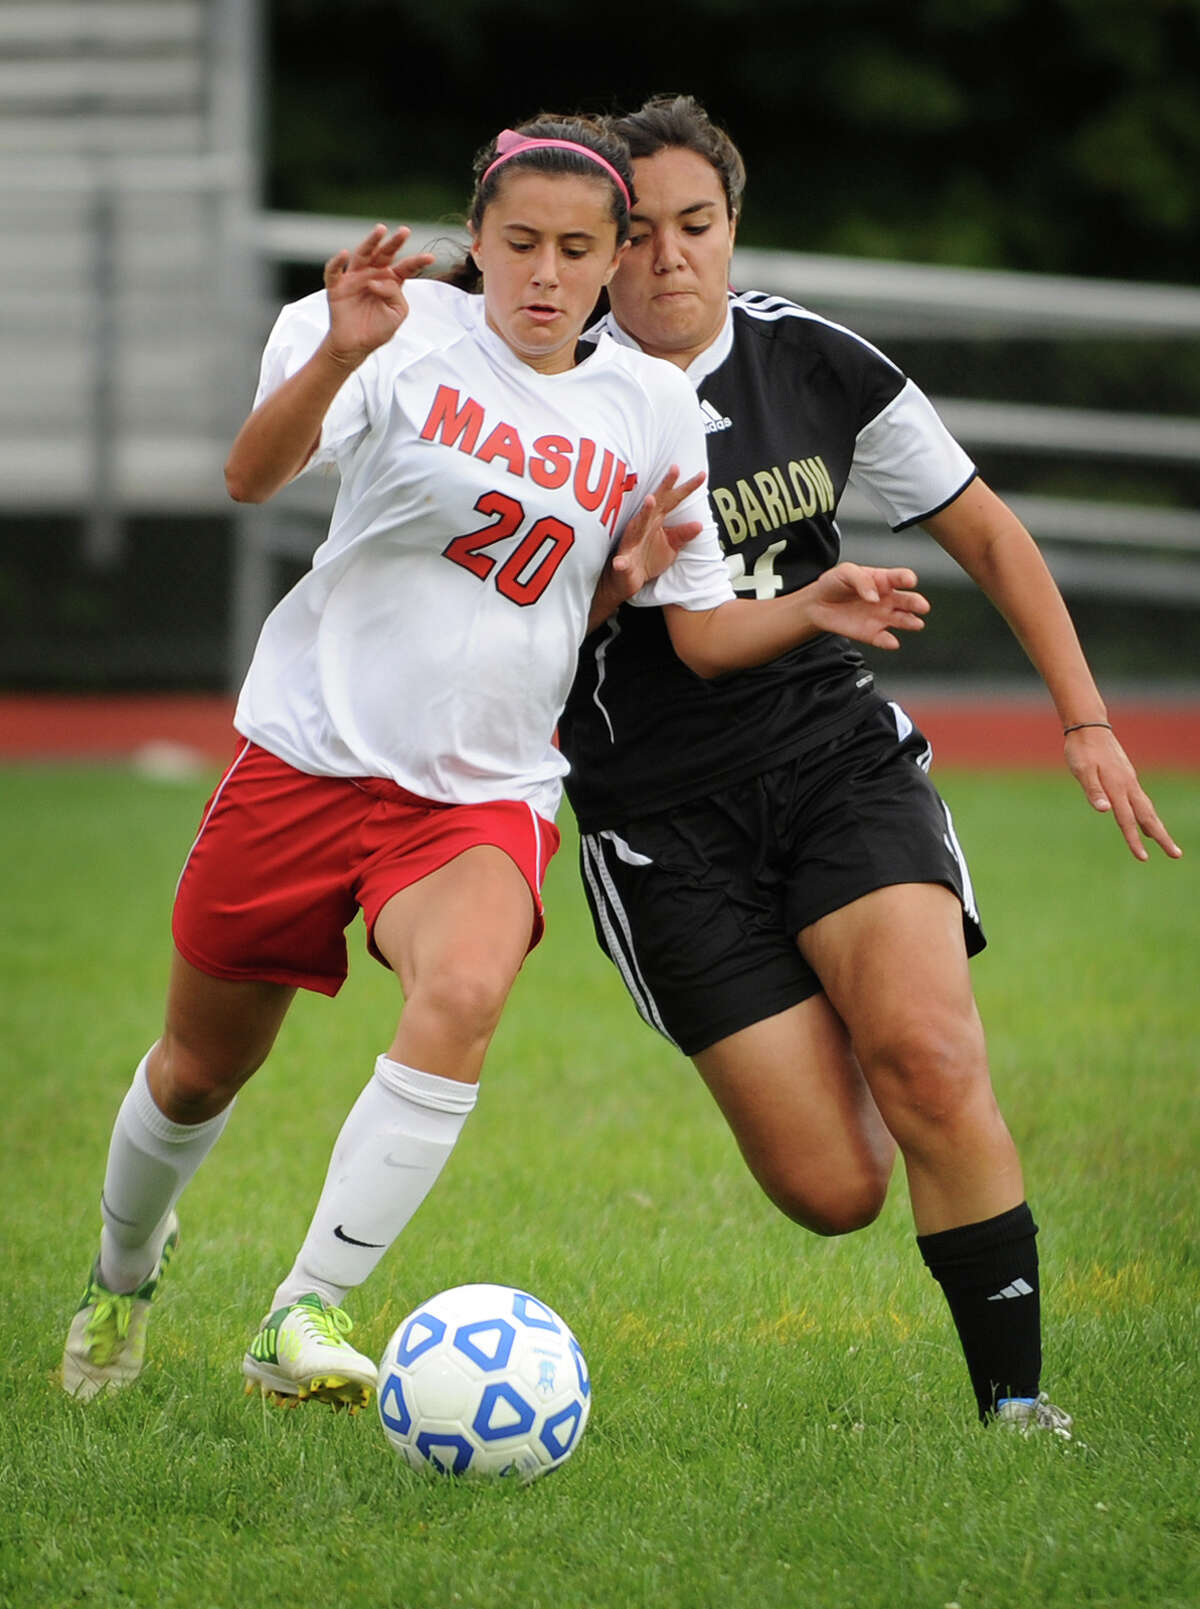 Masuk's Nicole Yanouzas, left, and Joel Barlow's Alejandra Avila chase down a ball at midfield during Barlow's 1-0 victory in their girls soccer matchup at Masuk High School in Monroe, Conn. on Monday, September 16, 2013.